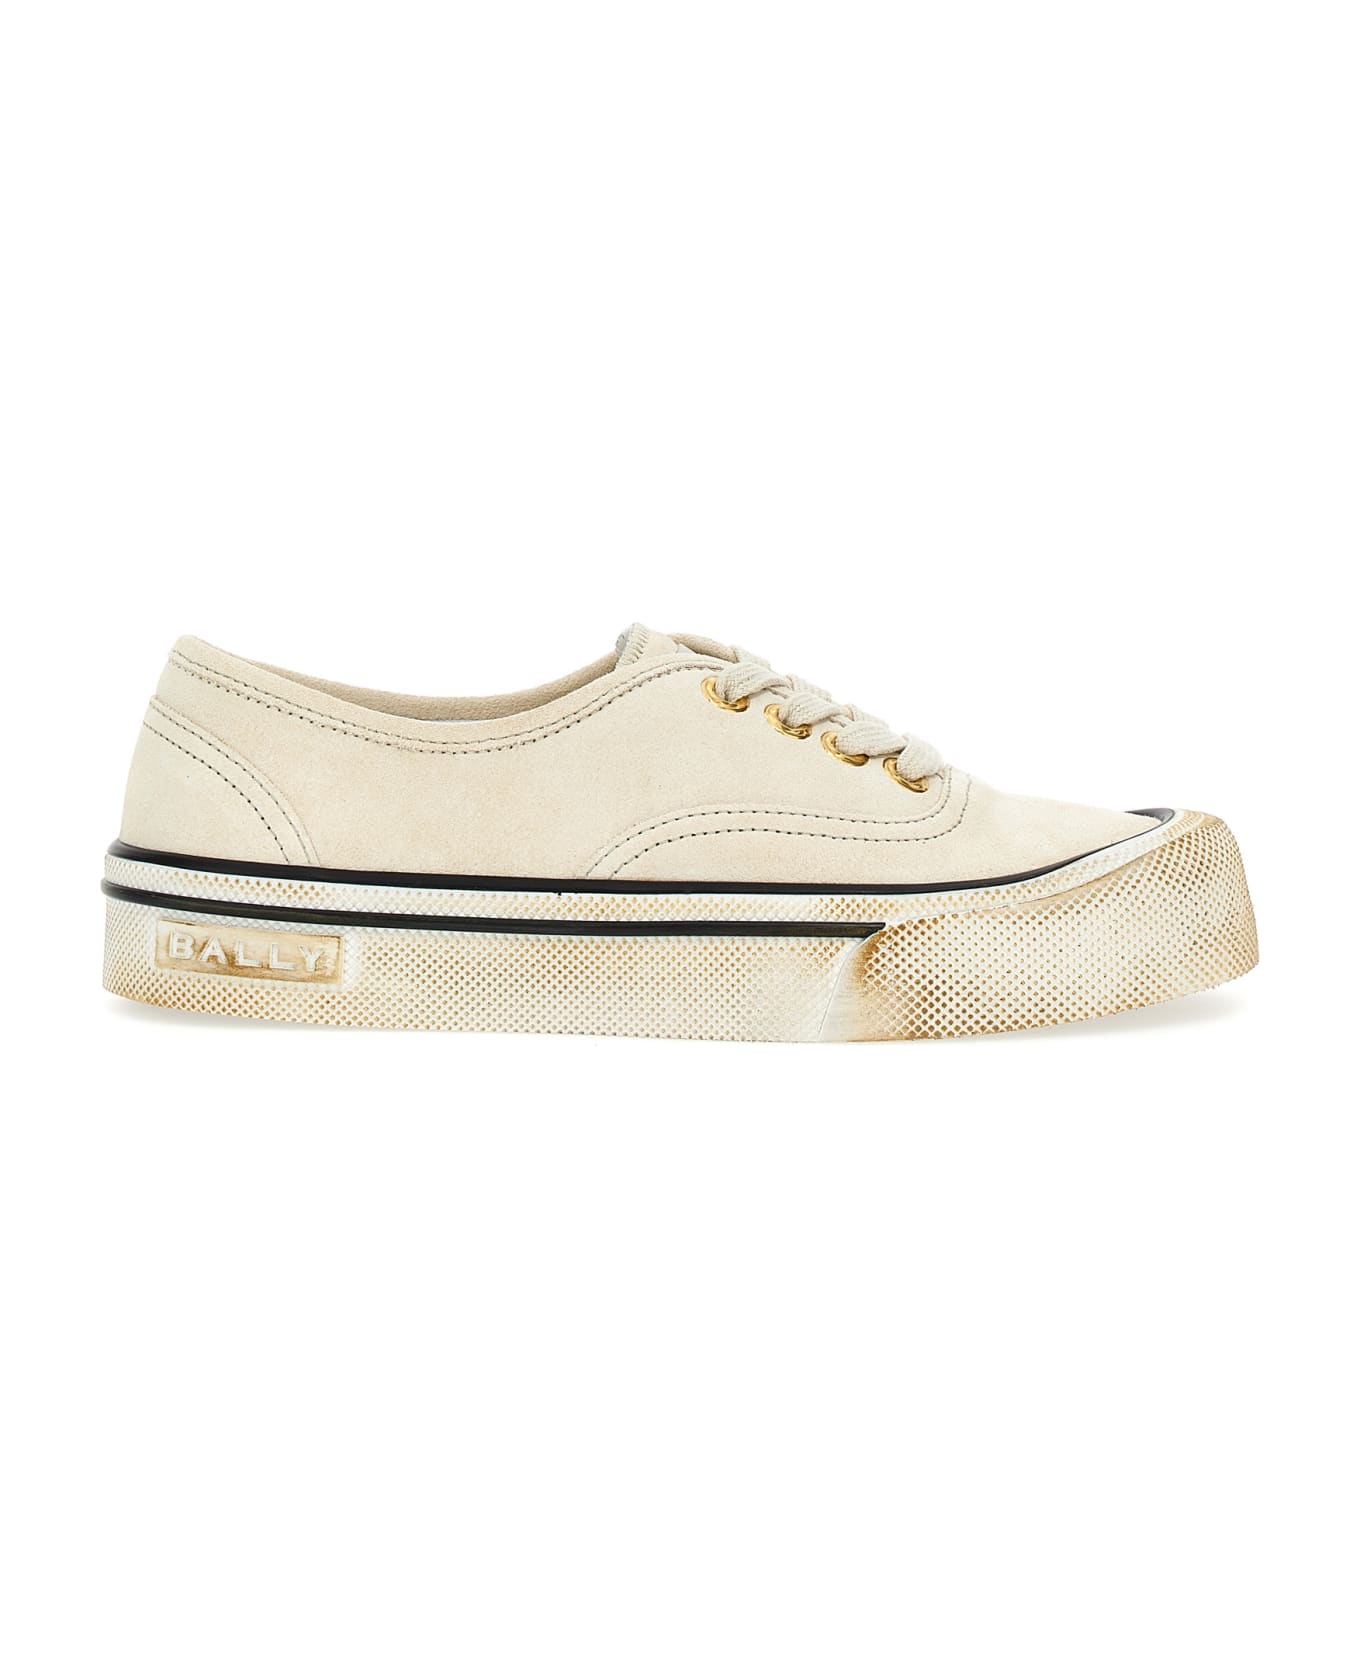 Bally 'lyder' Sneakers - White